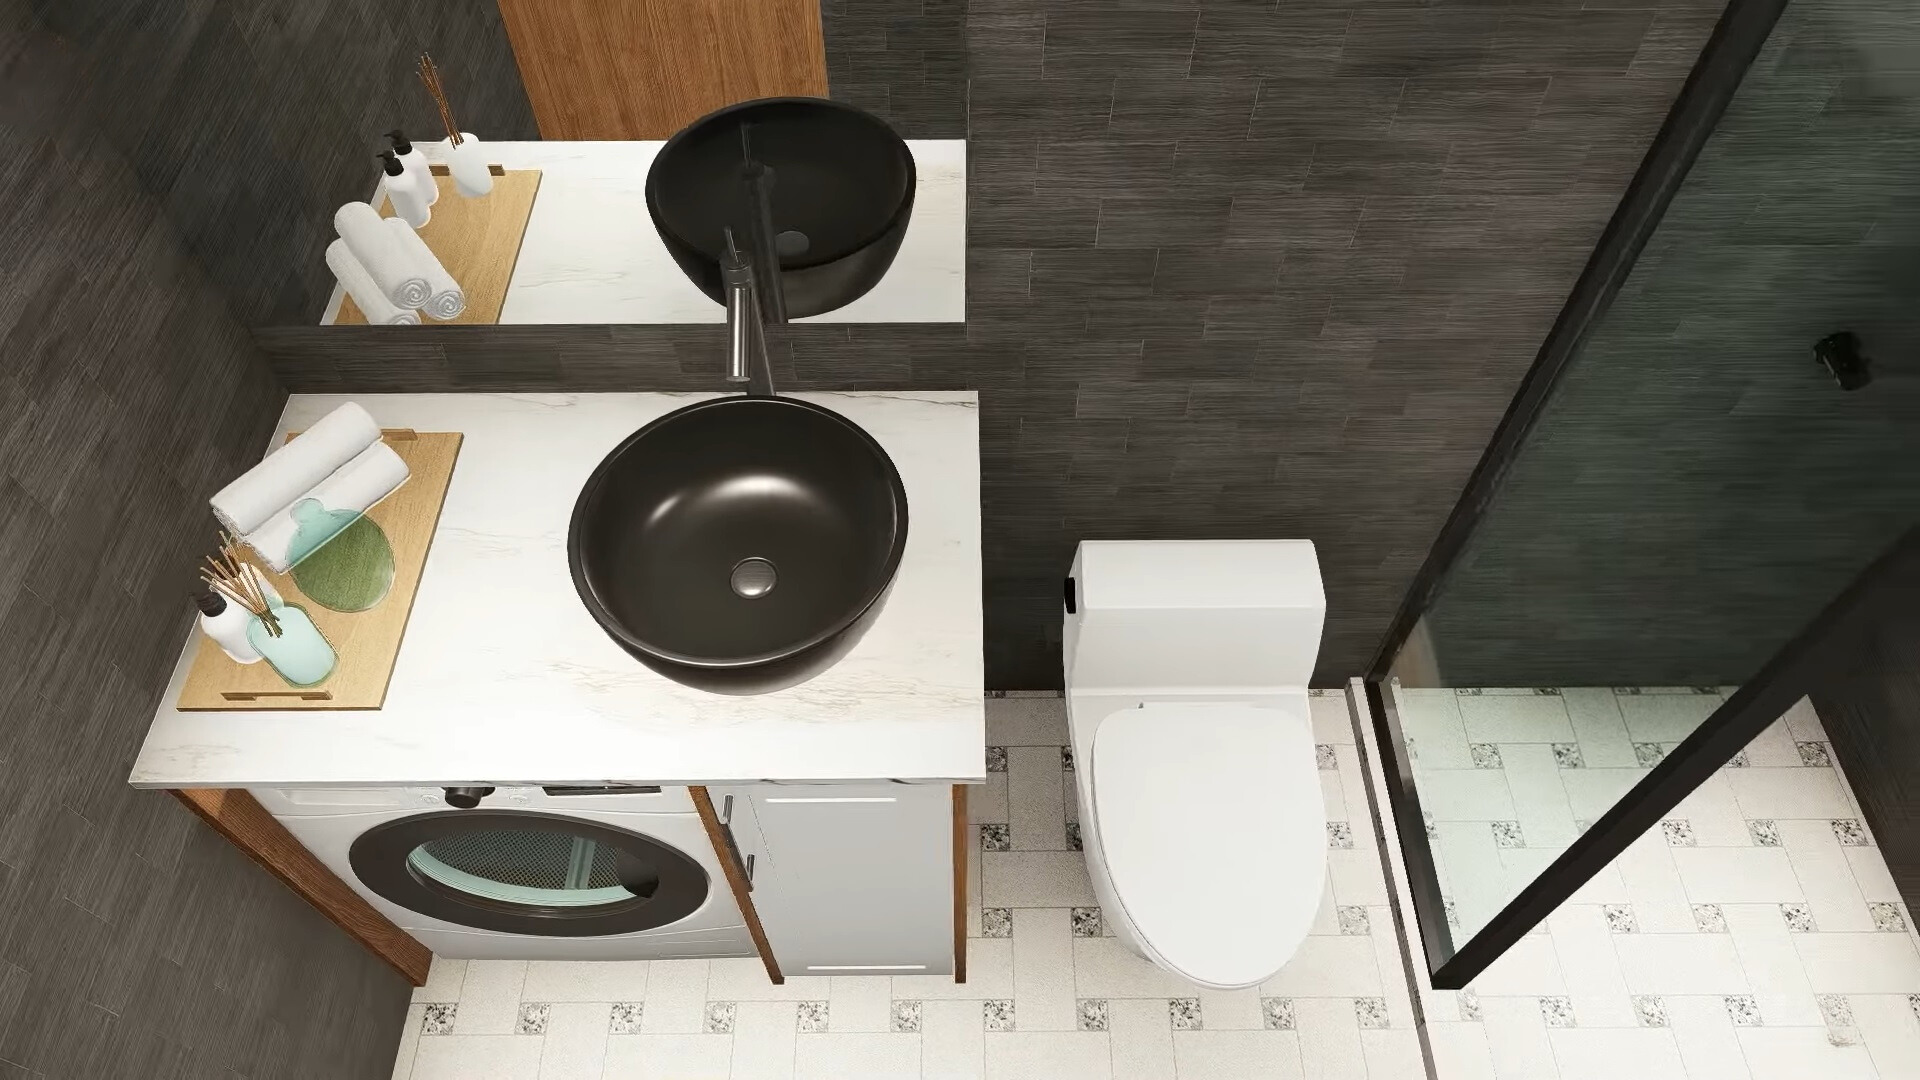 Toilet with black tiles and black sink, glass shower